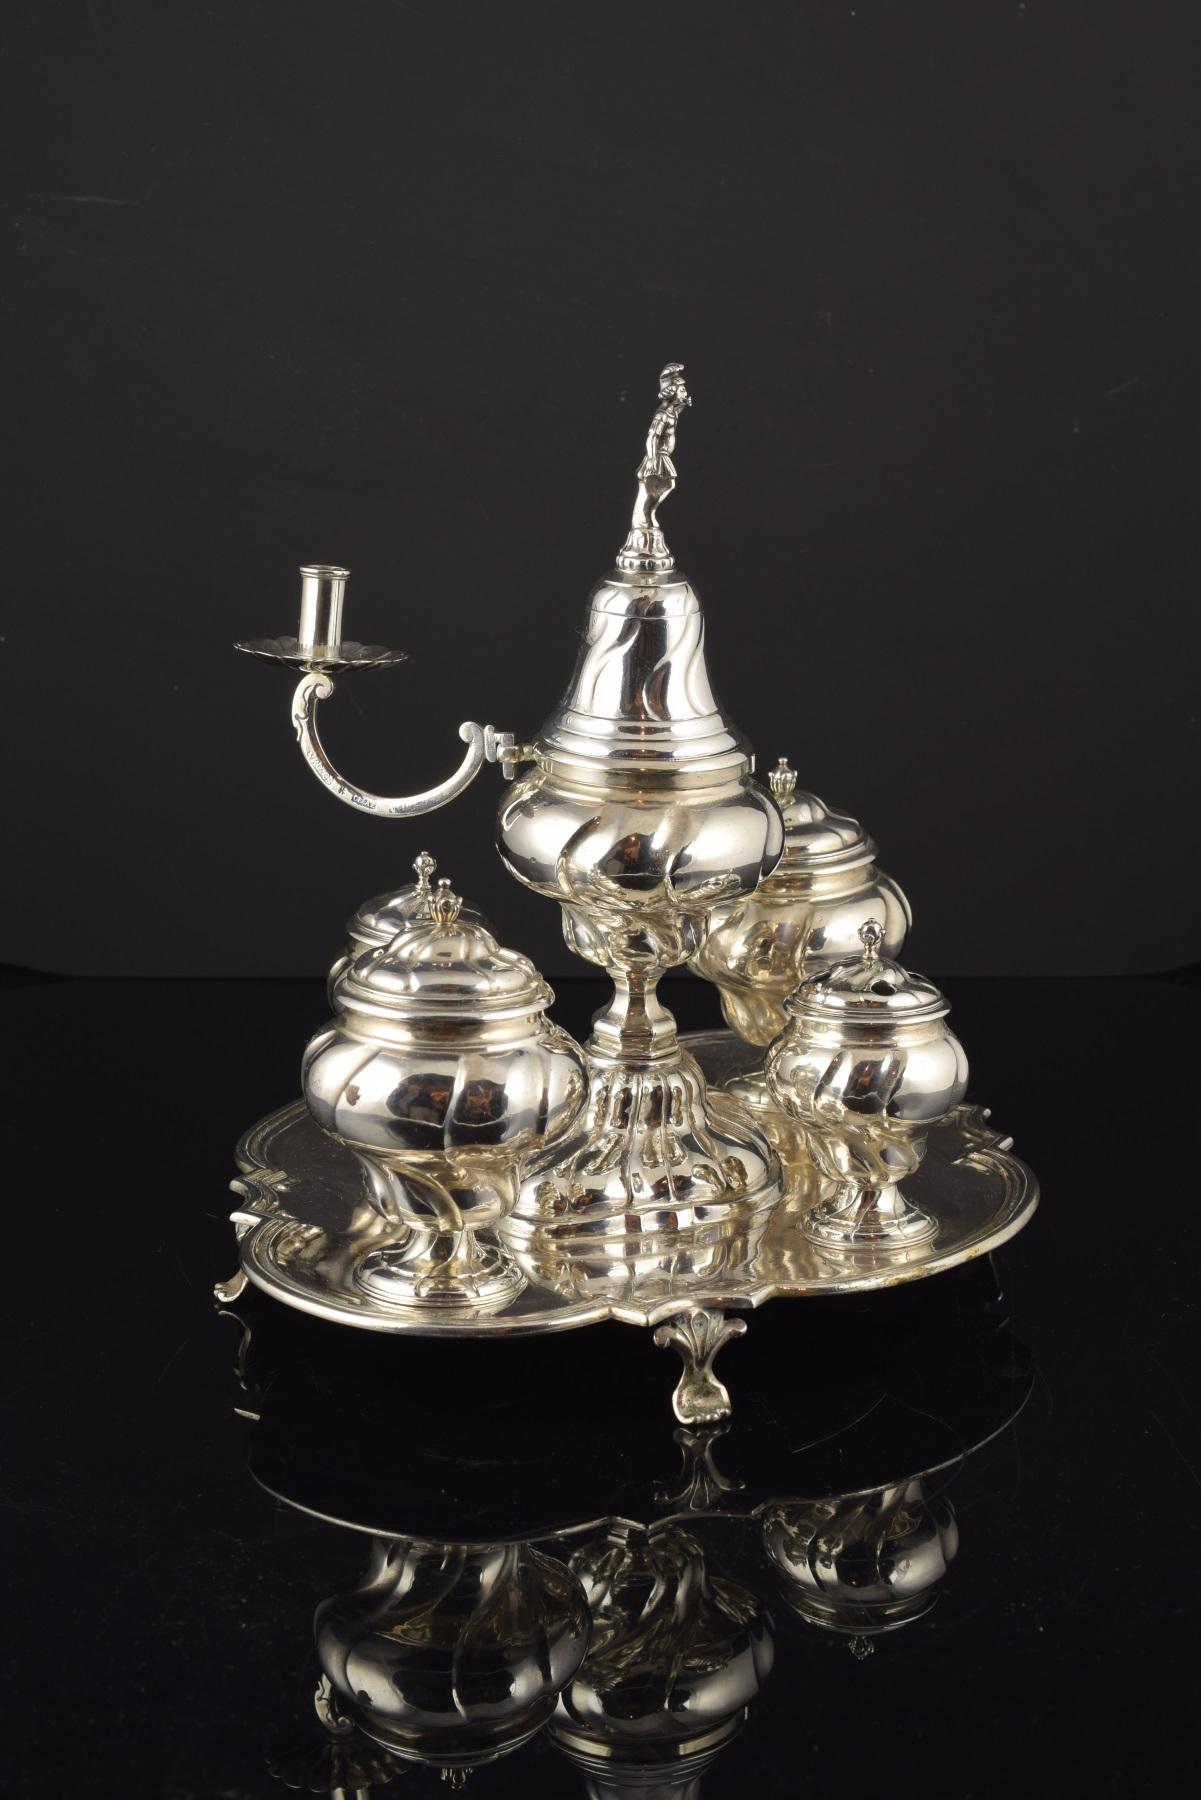 With hallmarks.
The base tray has a square shape with mixtilinear profiles and rests on legs with vegetal motifs. The four containers present helical gallonized feet, and pearl flower finials on the covers. A candlestick emerges another container,